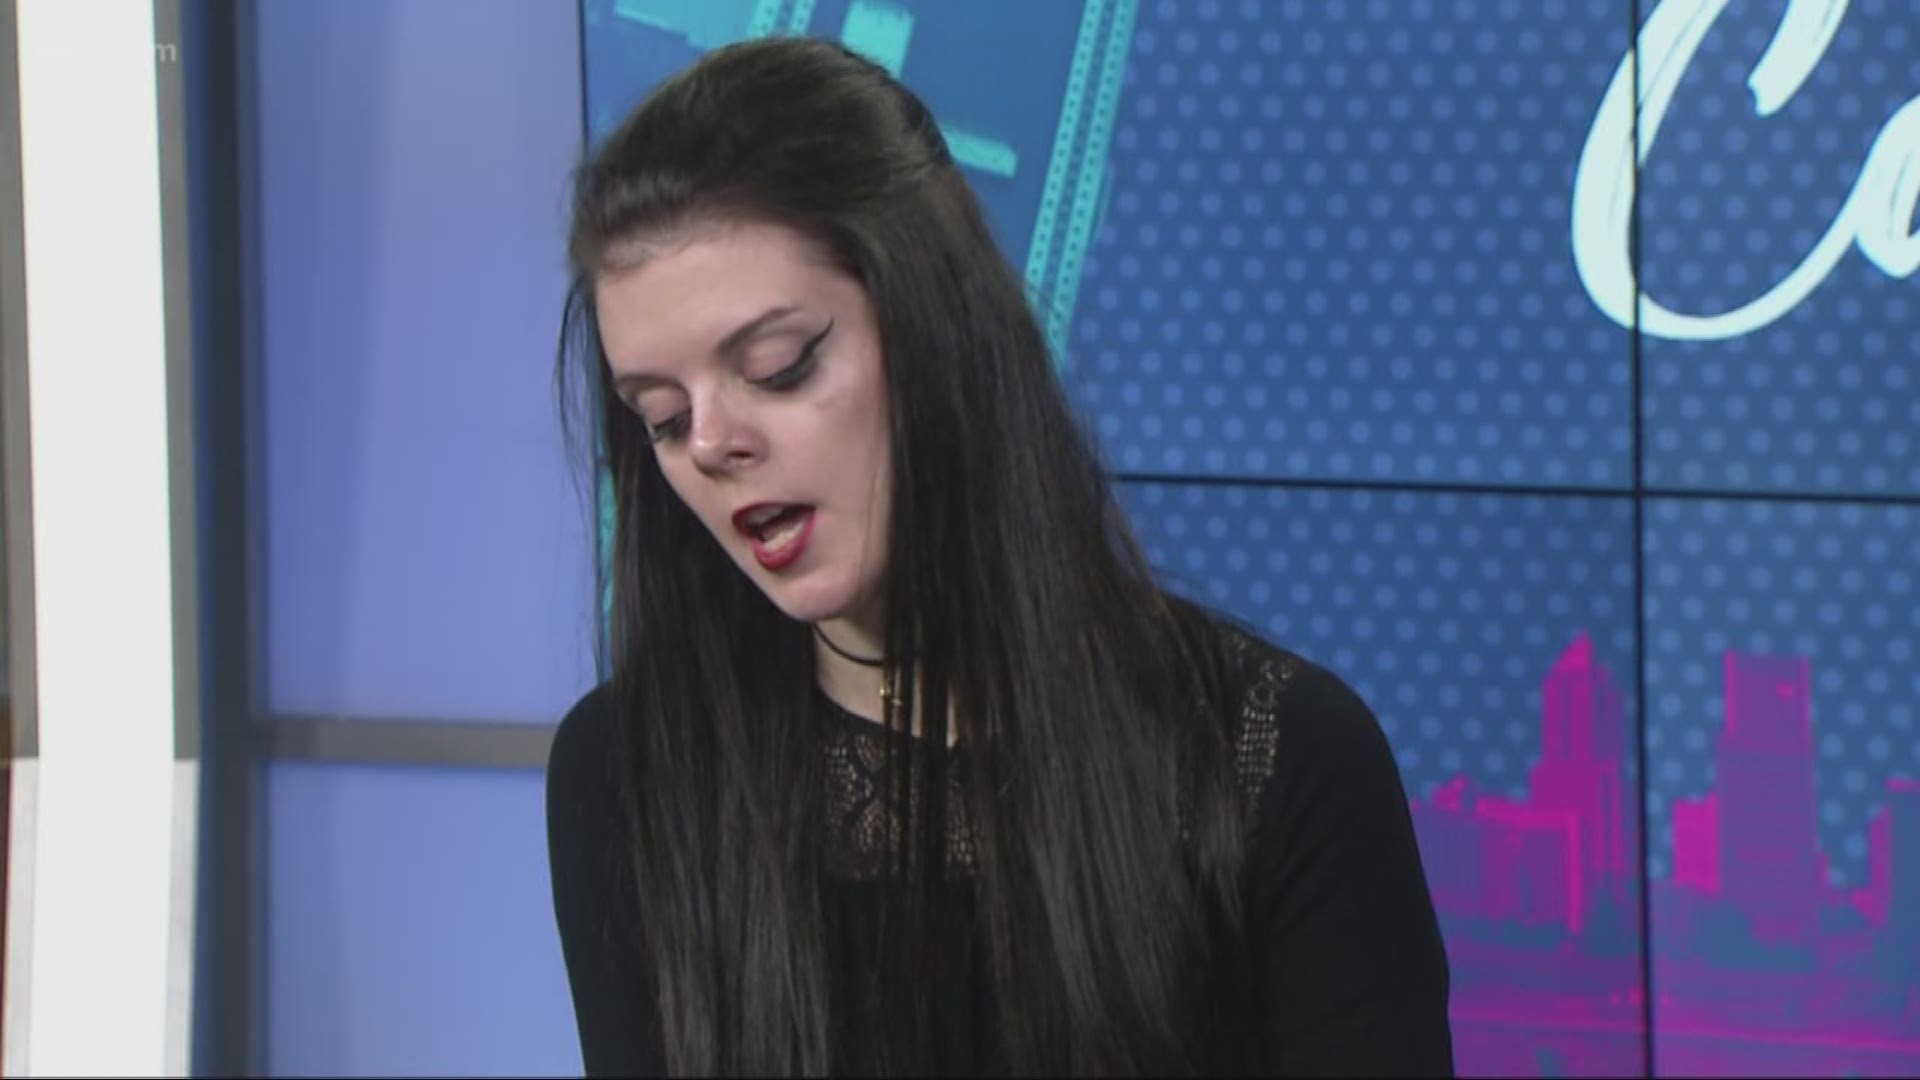 Portland musician Lauren Kershner plays her new single "Wicked" just ahead of its debut and her first ever music video.
#TonightwithCassidy